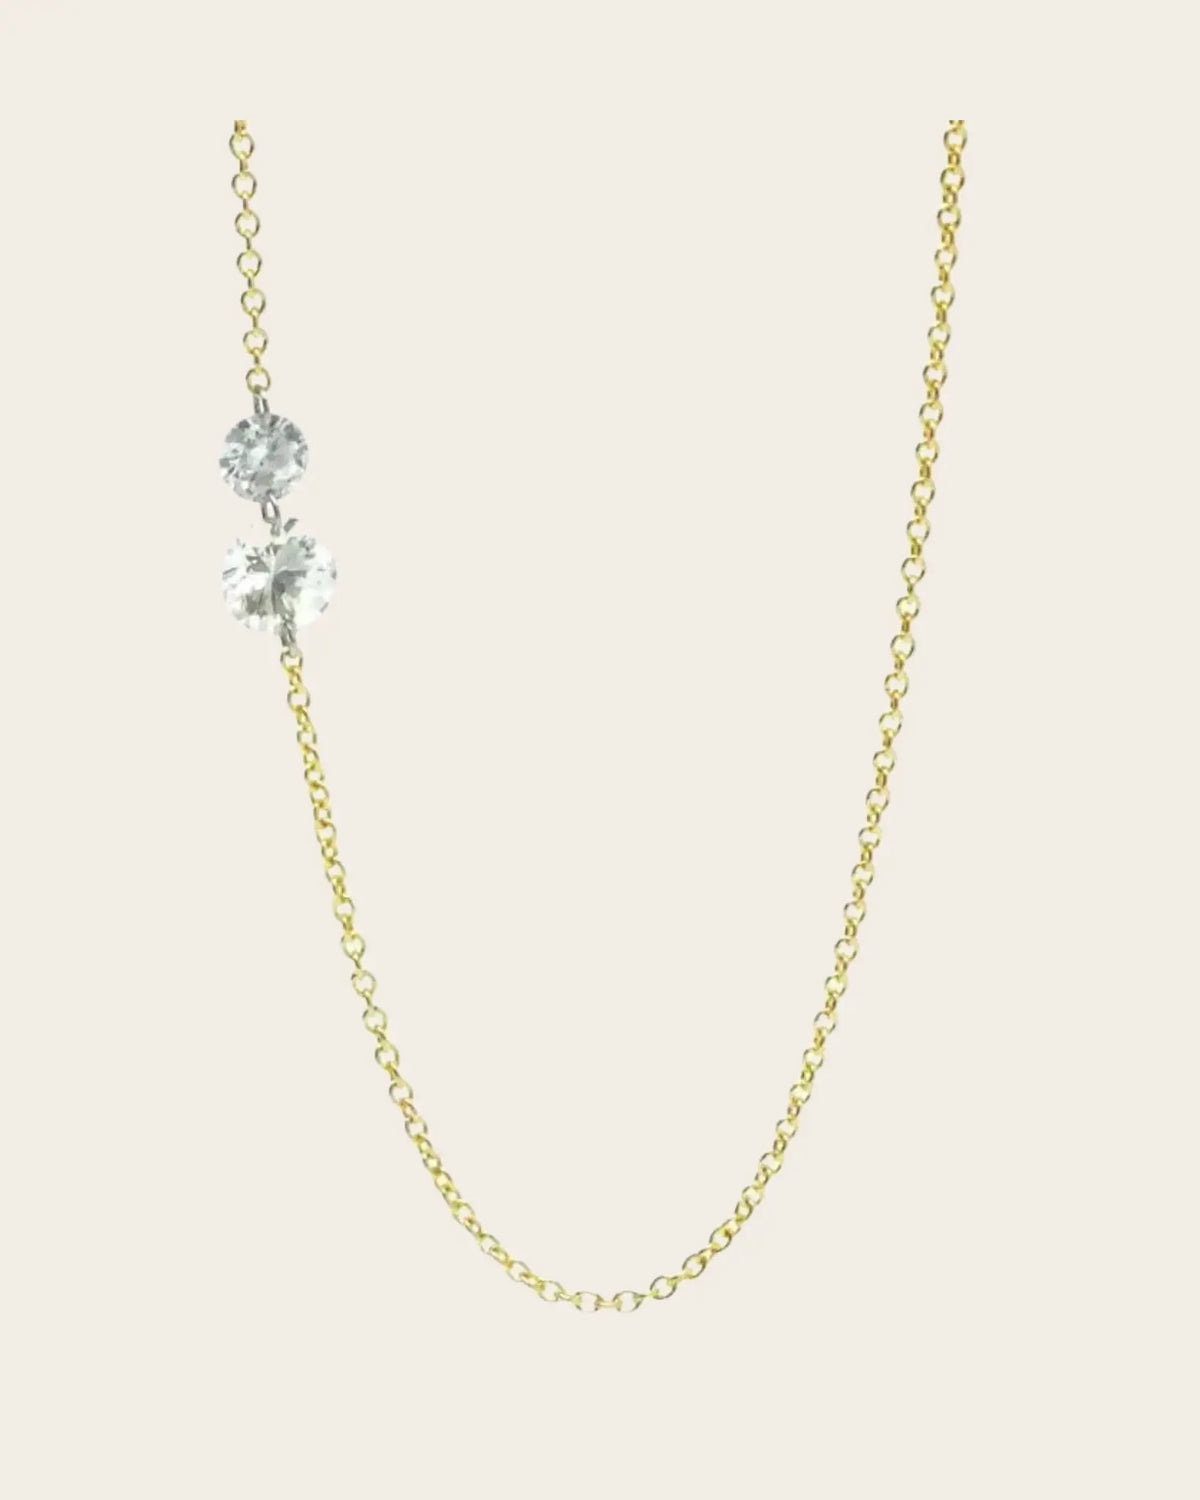 TAP Two Round Diamond Necklace TAP Two Round Diamond Necklace TAP TAP  Squash Blossom Vail